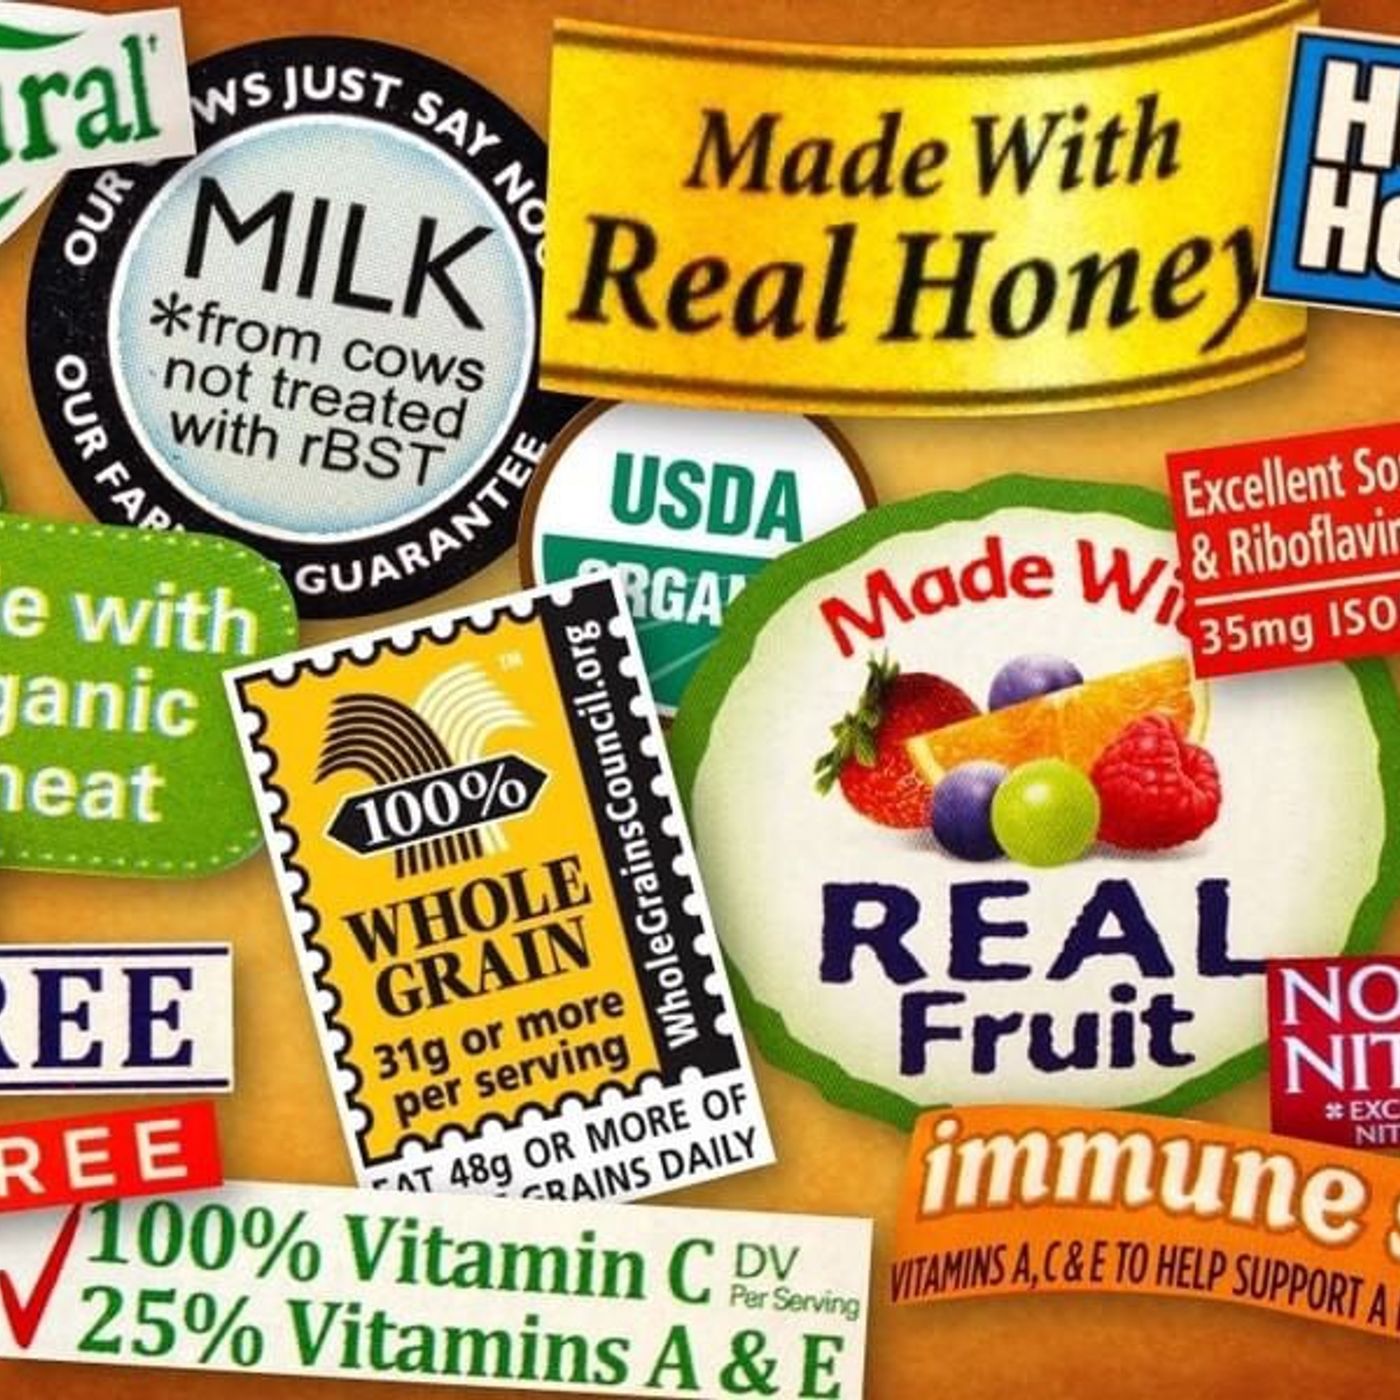 Organic, Non-GMO and Other Health Food Buzz Words Explained